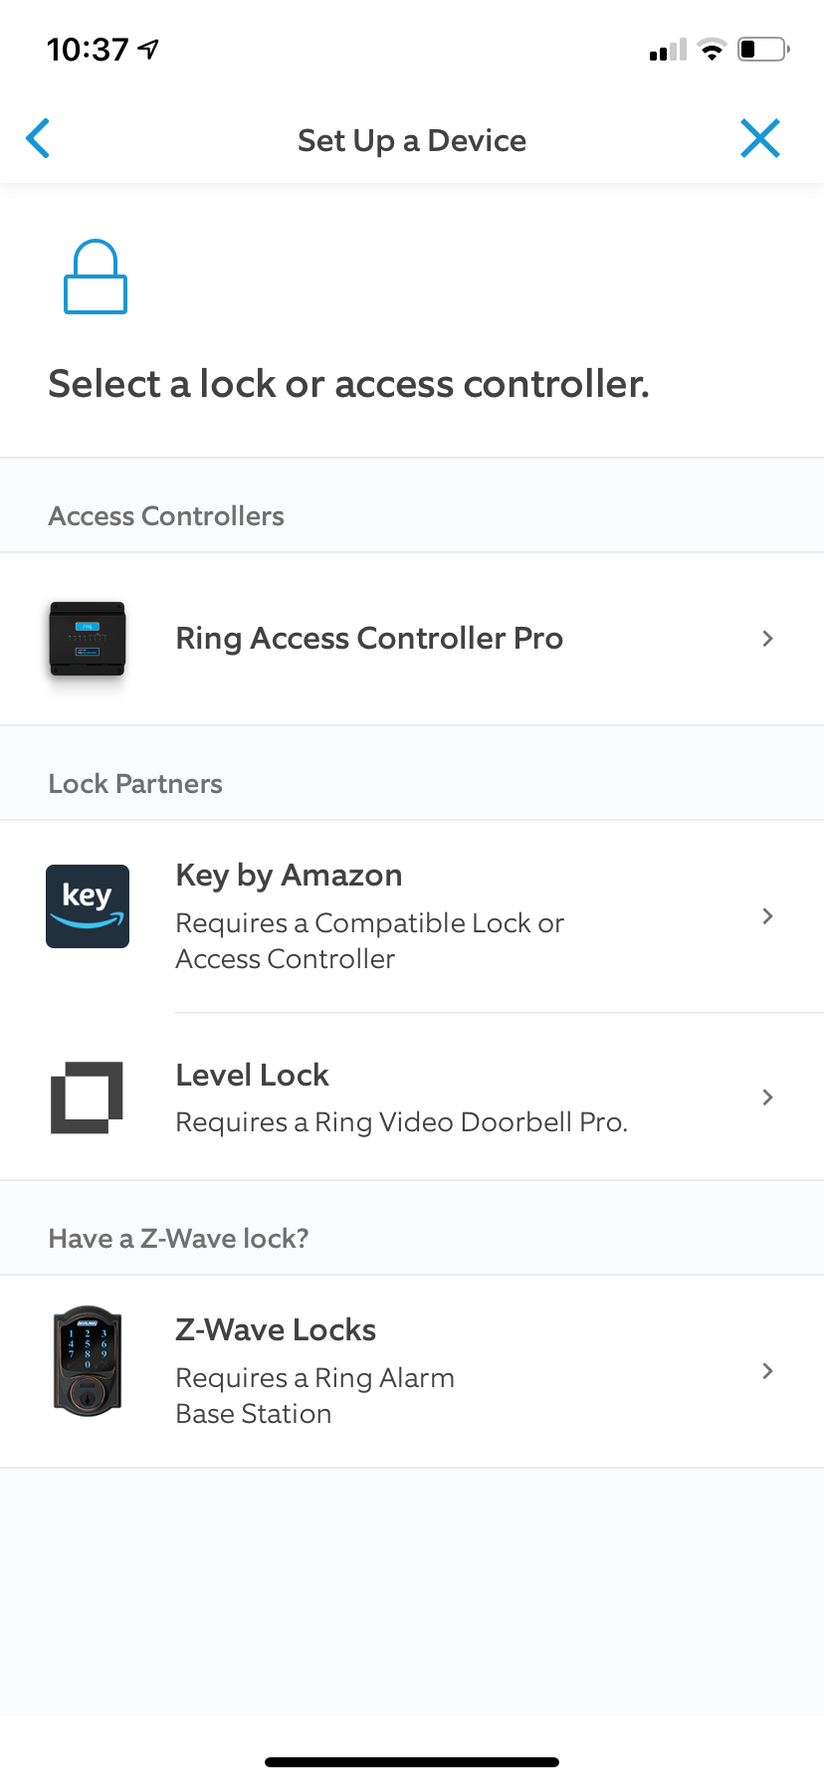 Ring Smart Doorbell Setup for iOS - Ace Hardware 